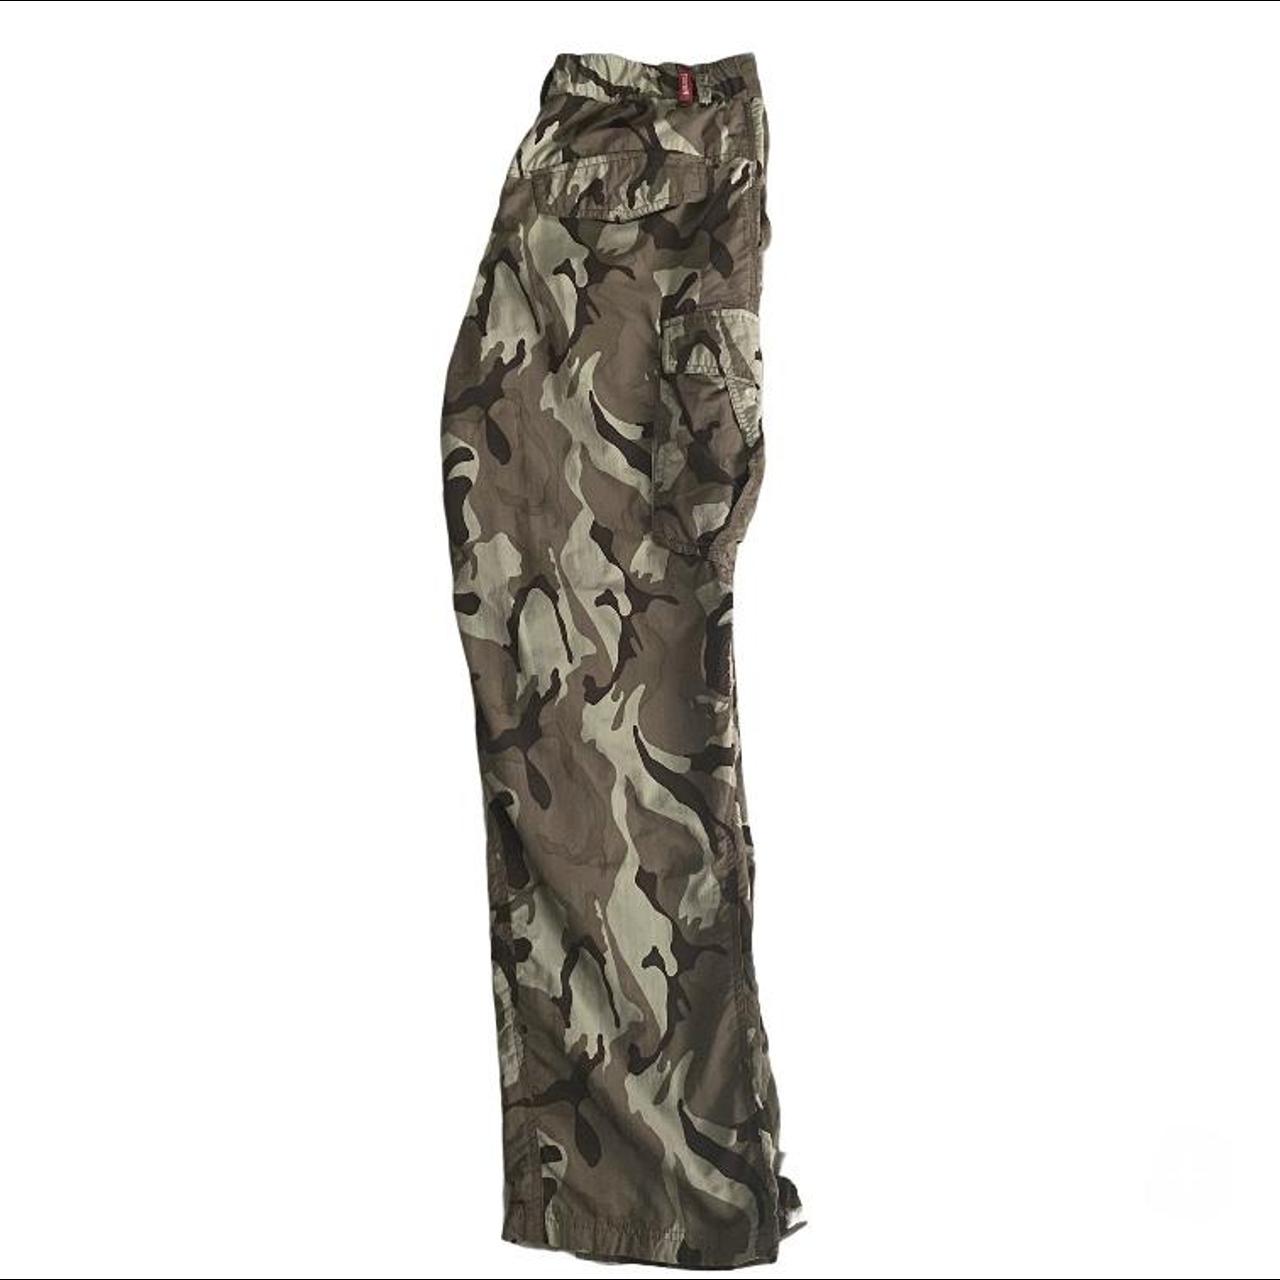 bear grylls trousers products for sale | eBay